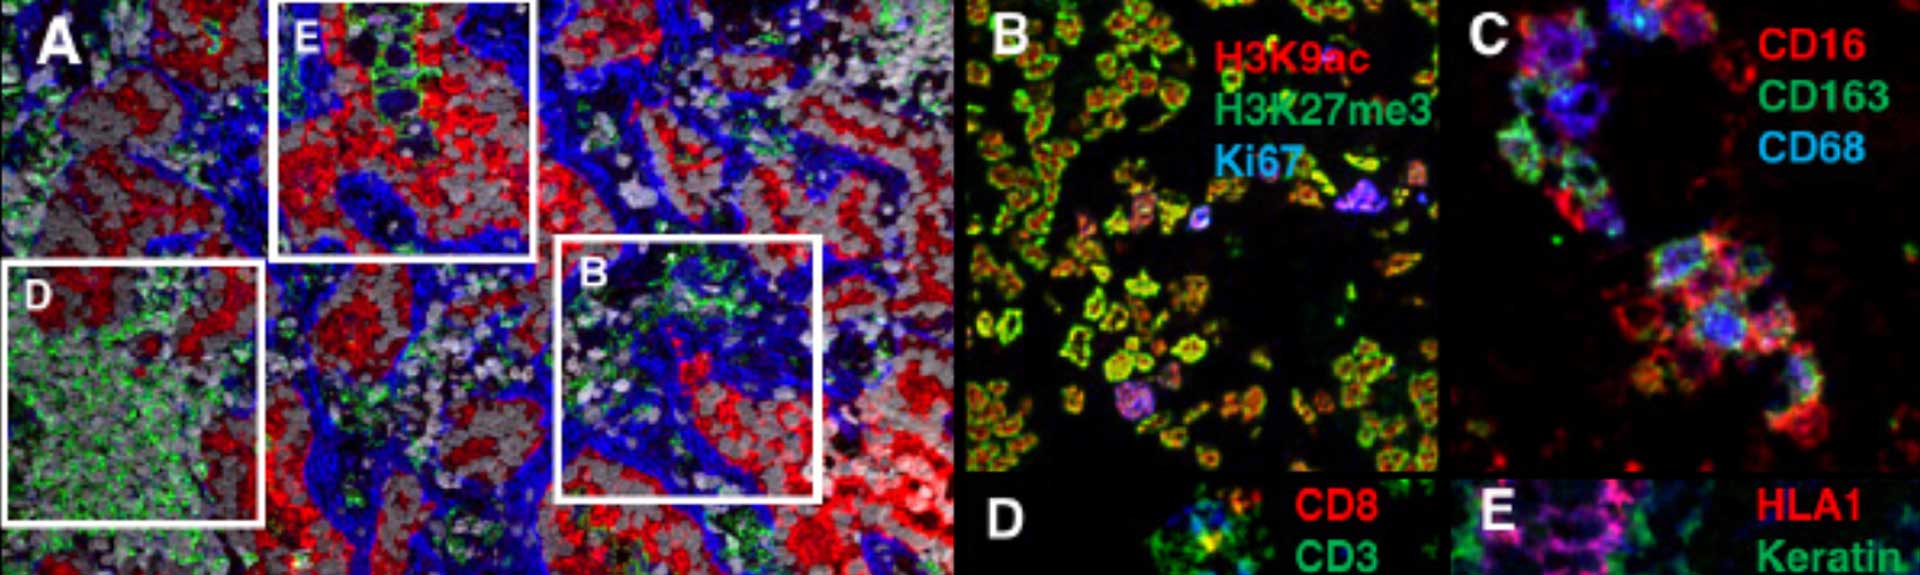 Image shows high content cell and molecule spatial analysis